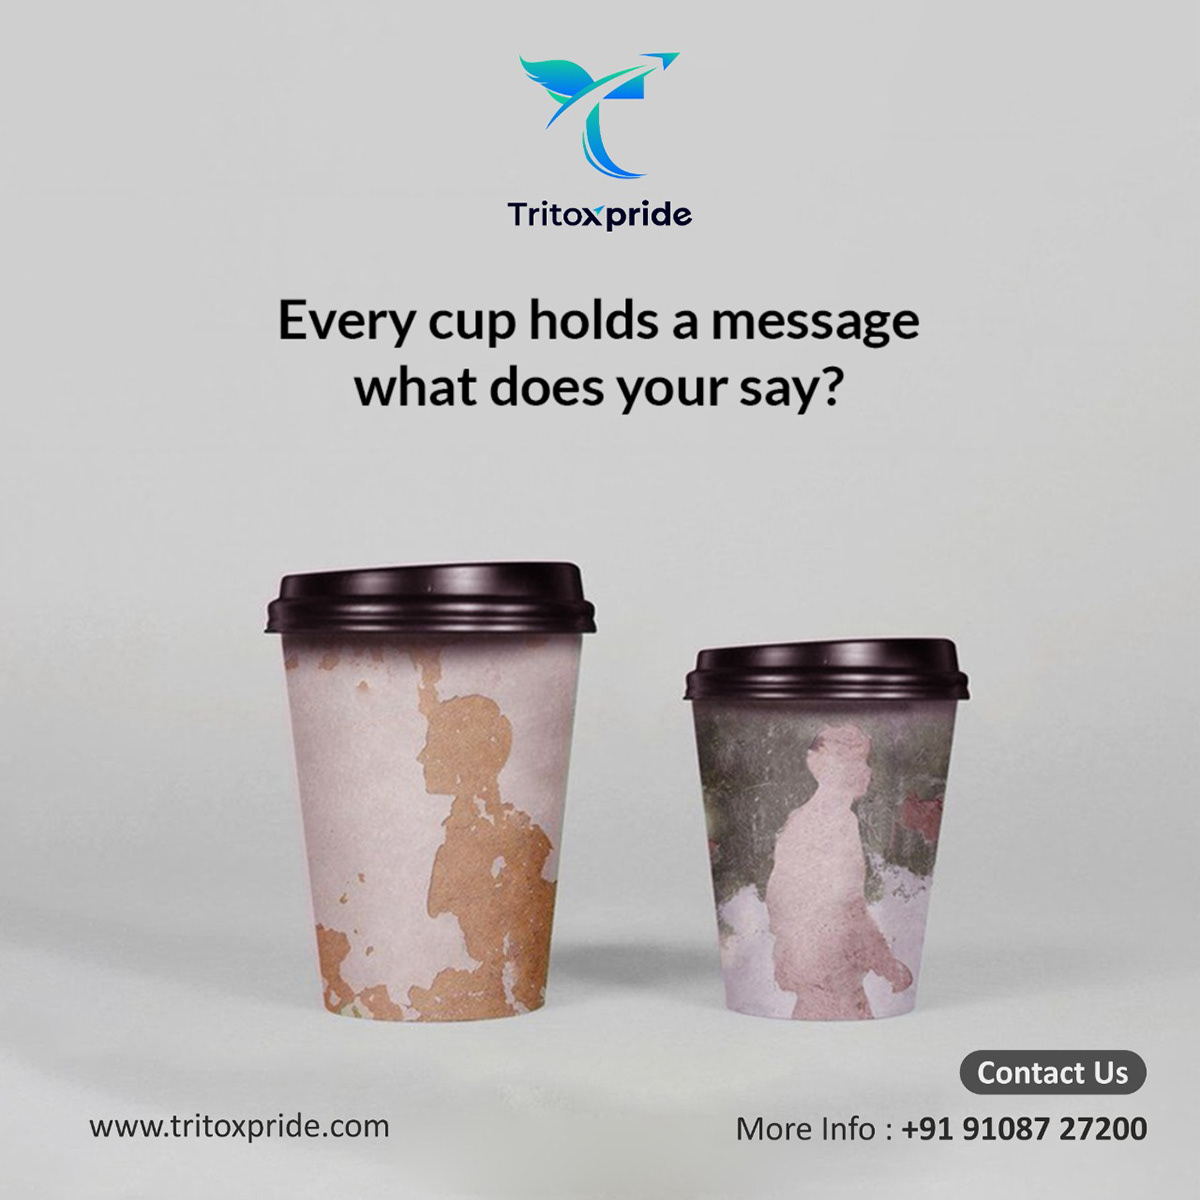 sippycups